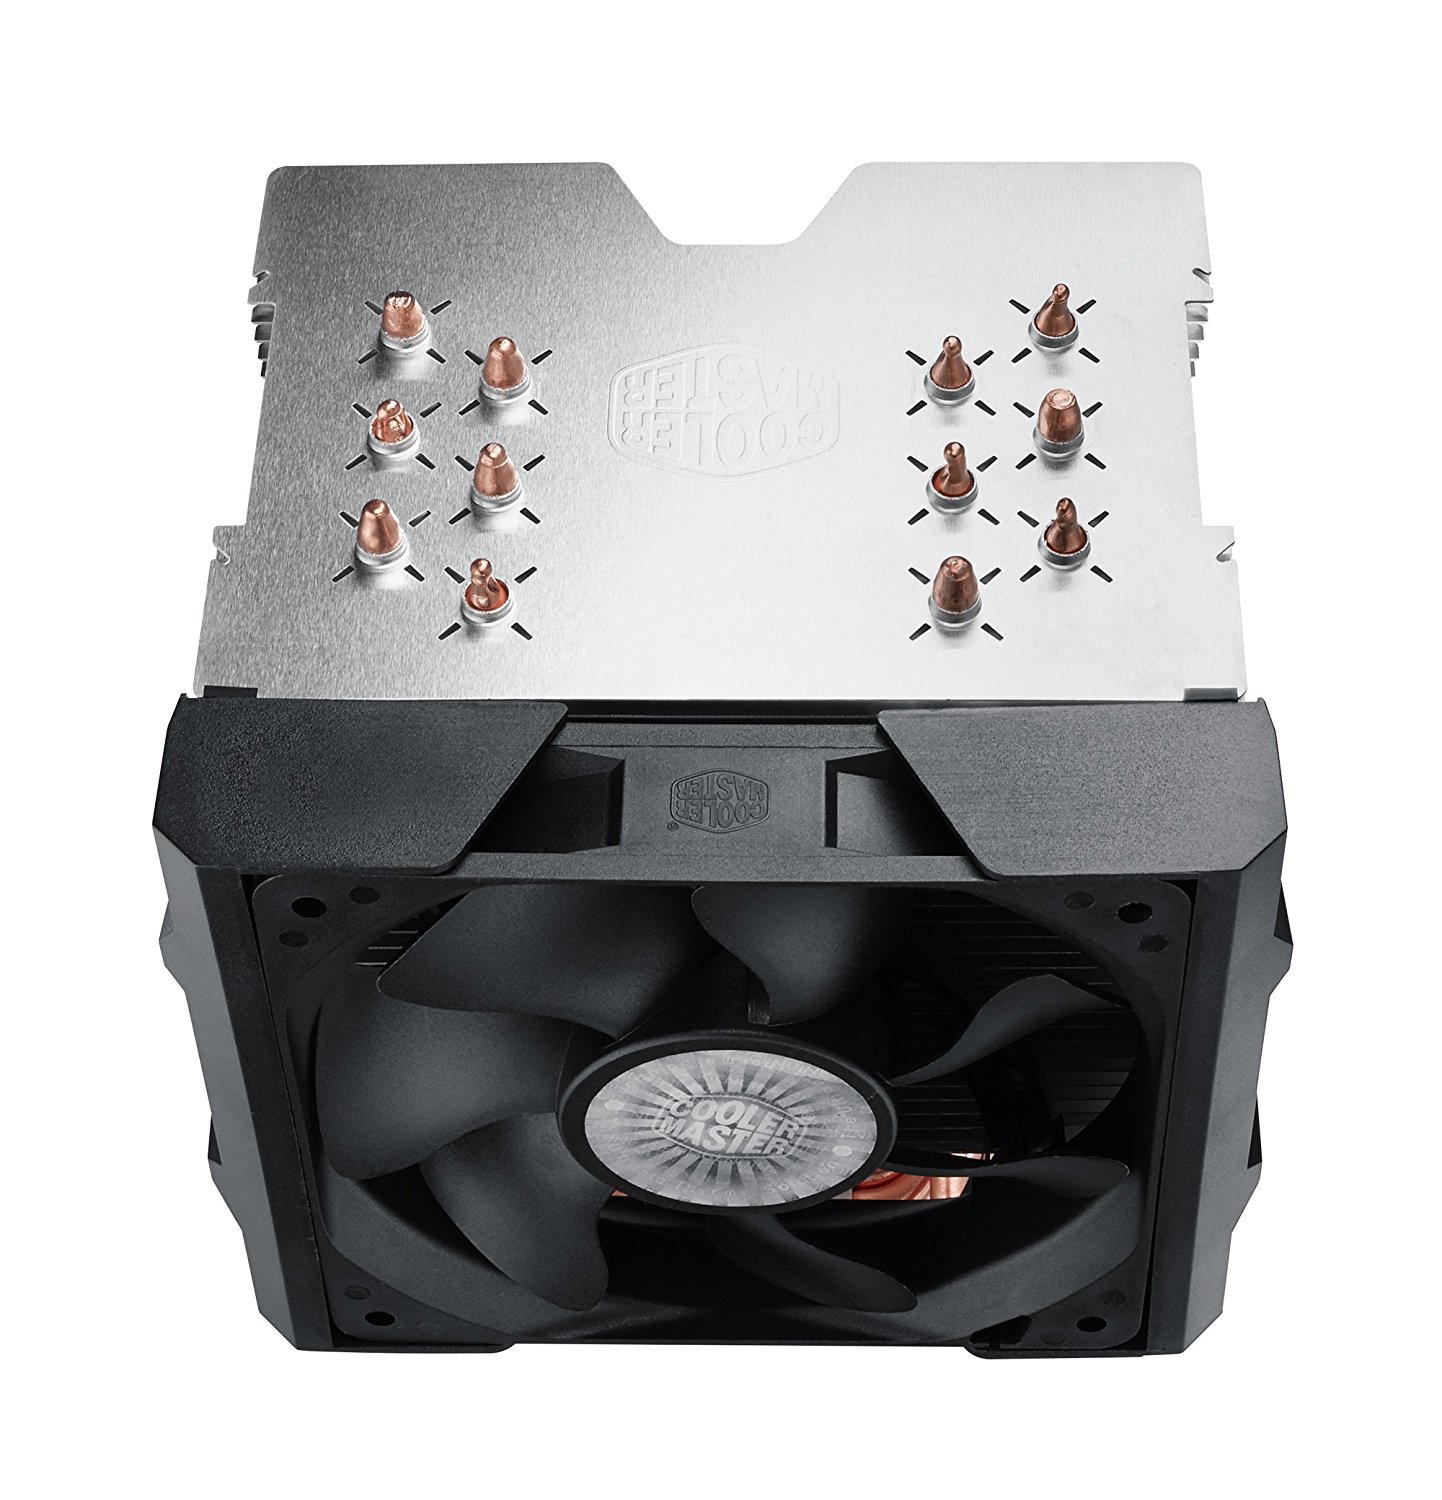 Cooler Master Hyper 612 Ver.2 - Silent CPU Air Cooler with 6 Direct Contact Heatpipes and Folding Fin Structure (RR-H6V2-13PK-R1) - image 4 of 10